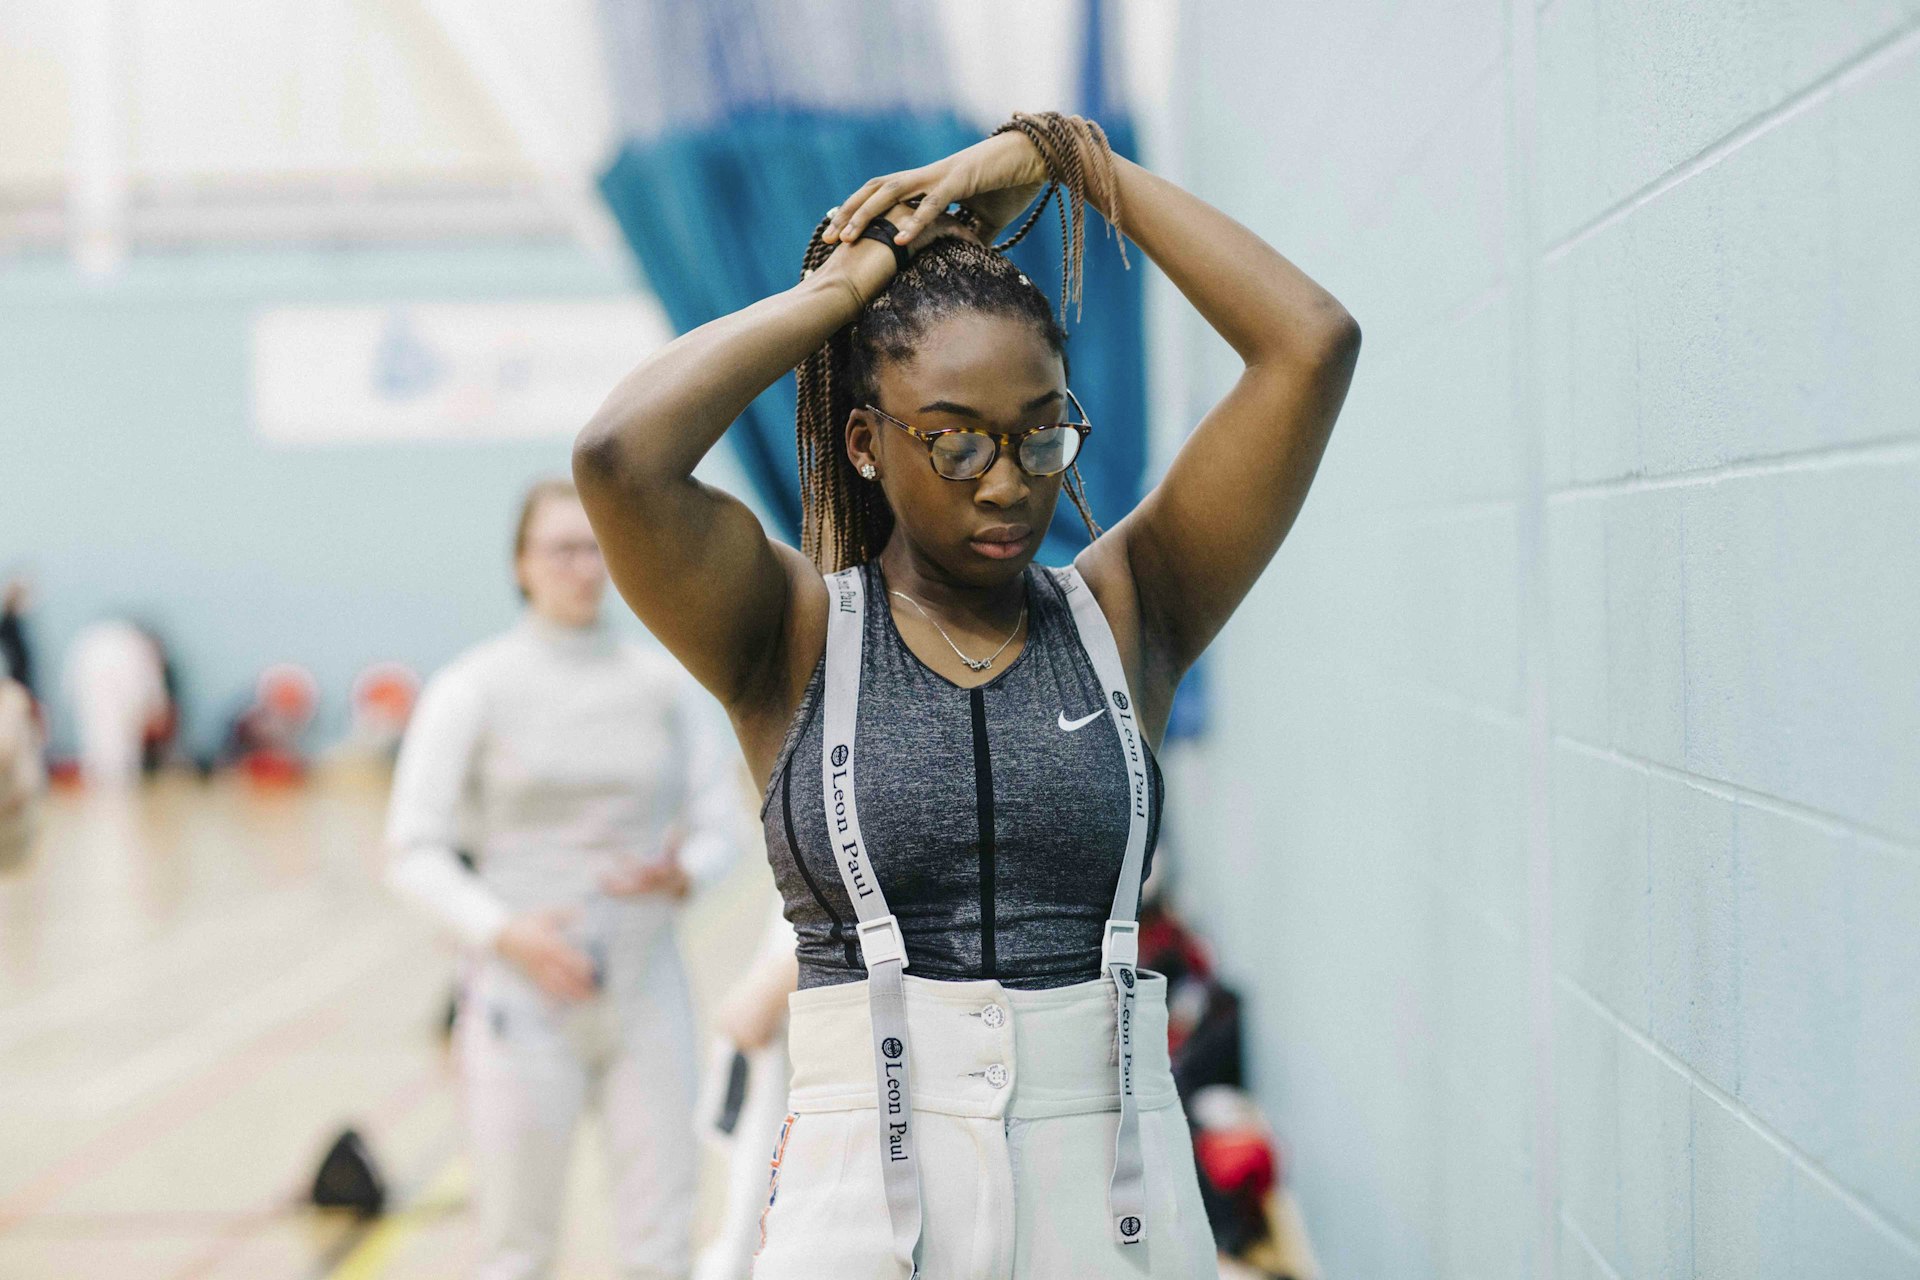 The teen champion taking the fencing world by storm